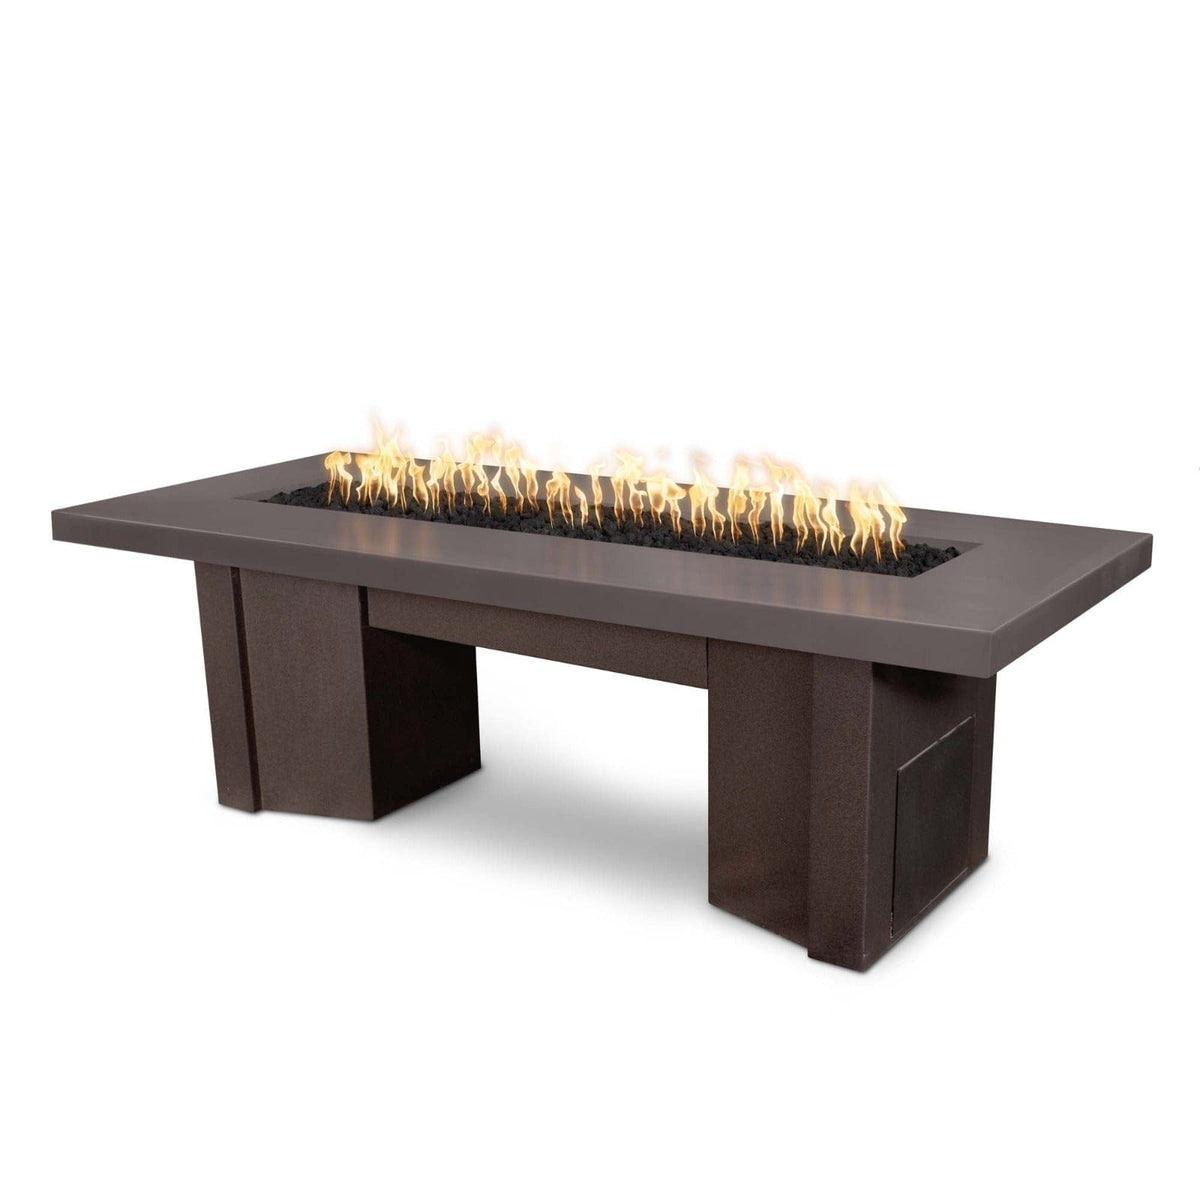 The Outdoor Plus Fire Features Chestnut (-CST) / Java Powder Coated Steel (-JAV) The Outdoor Plus 78&quot; Alameda Fire Table Smooth Concrete in Liquid Propane - Match Lit with Flame Sense System / OPT-ALMGFRC78FSML-LP